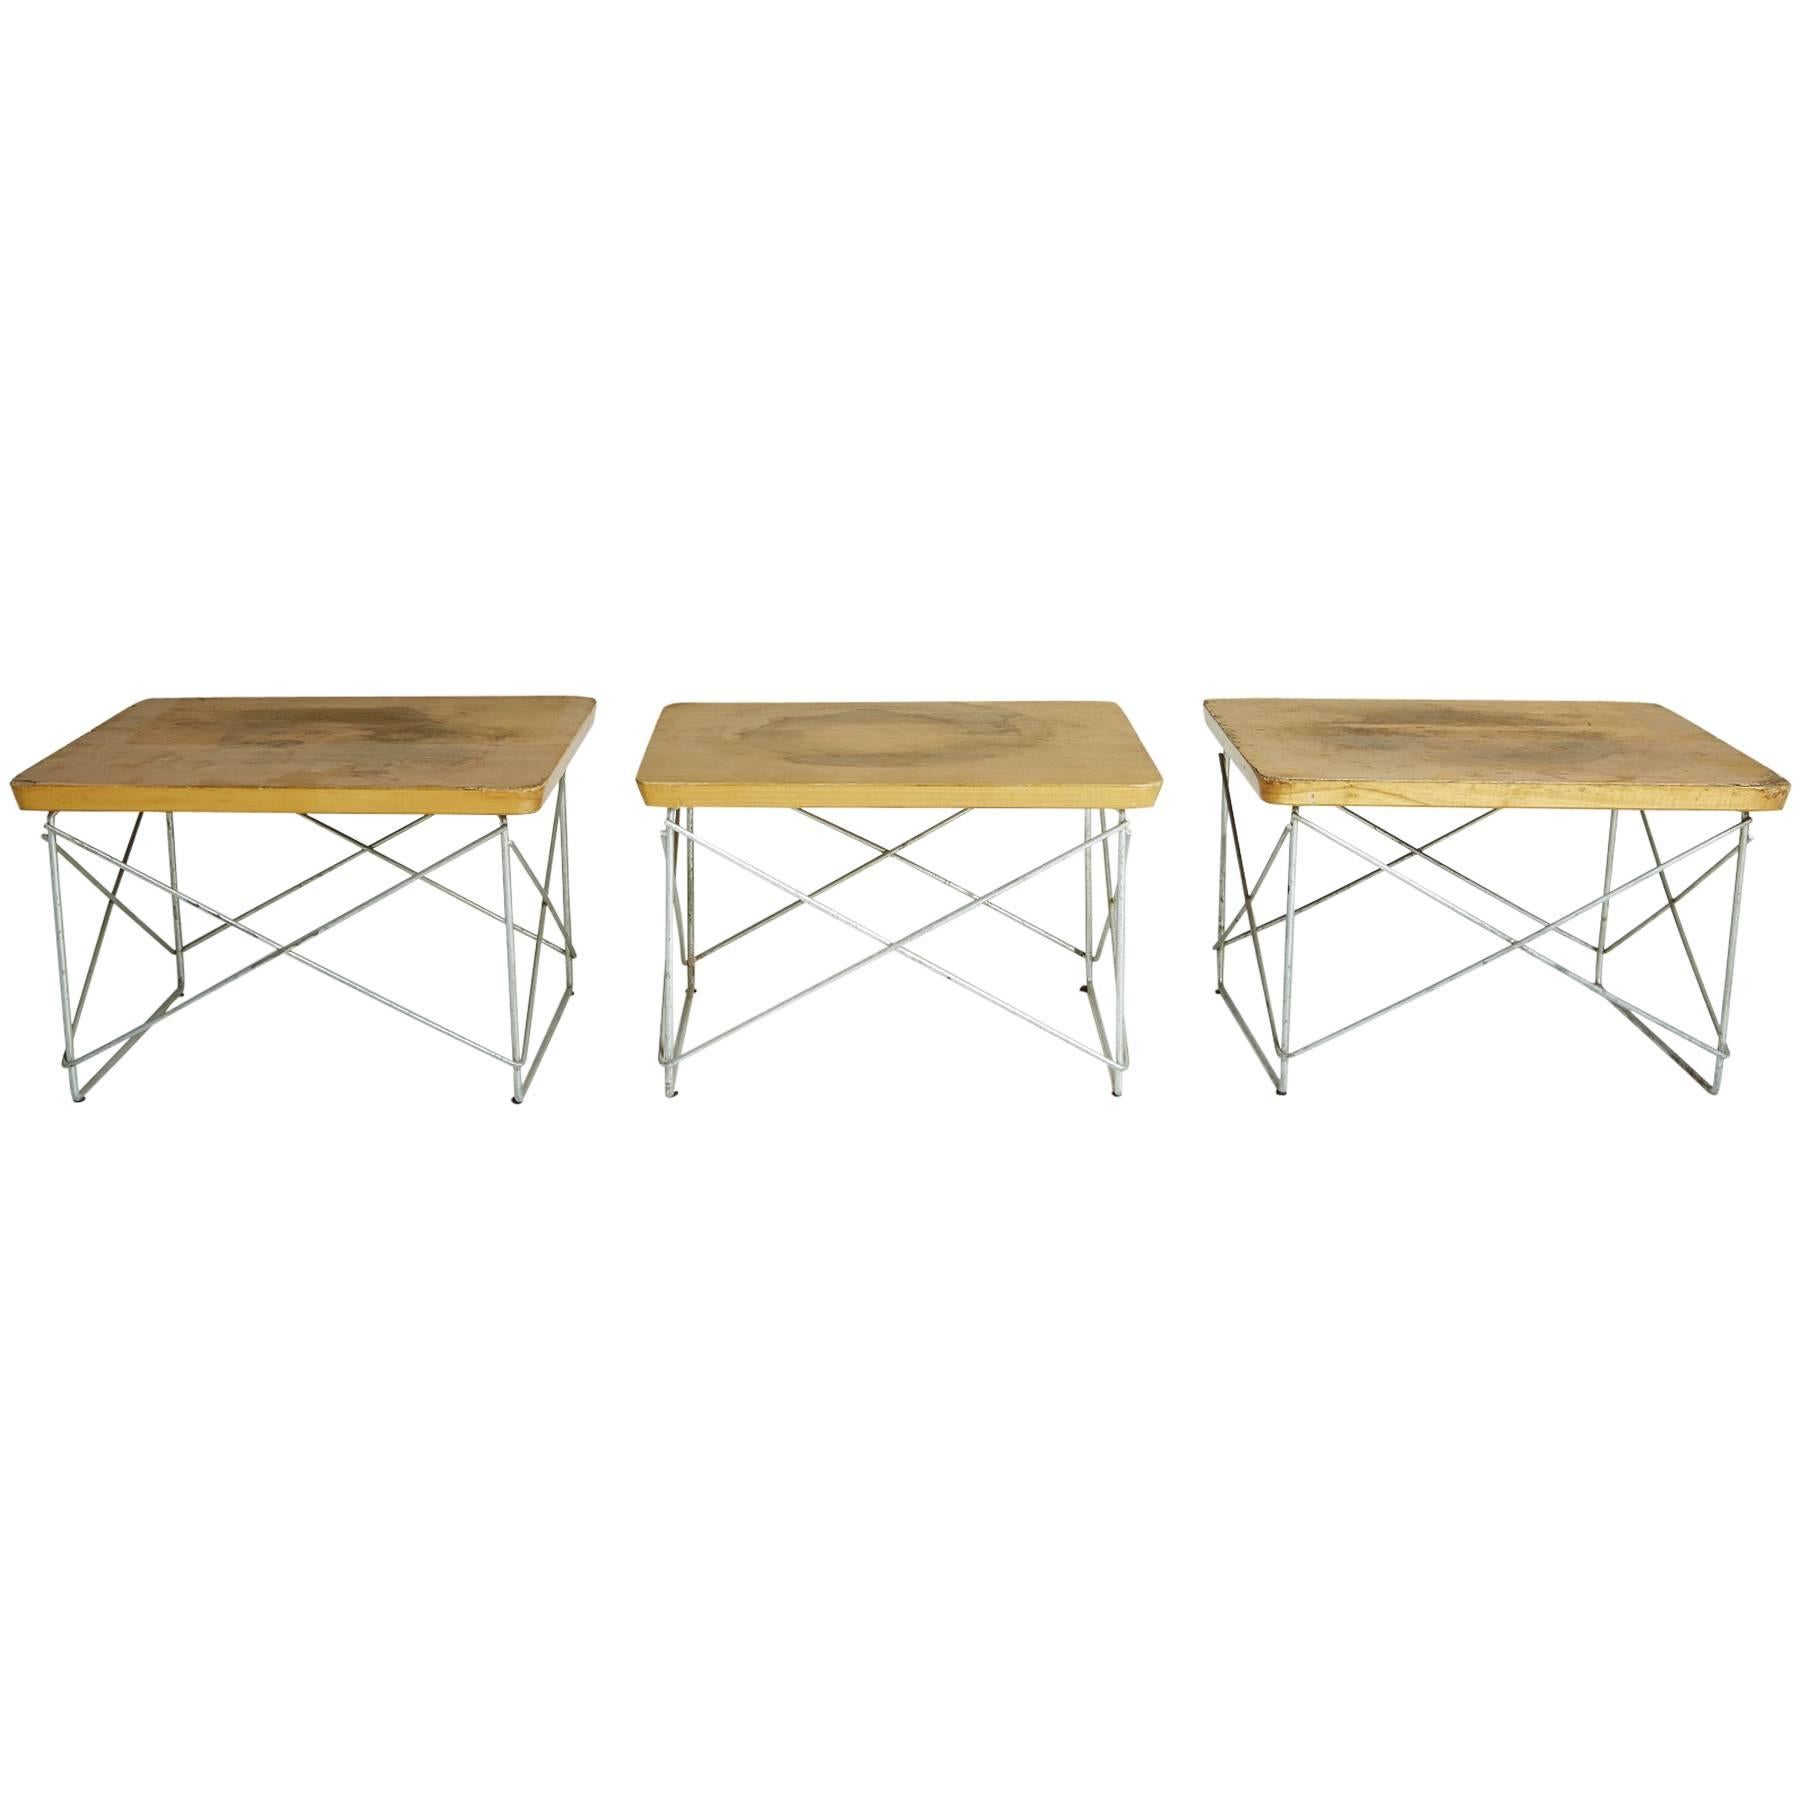 1950s Birch LTR Tables by Eames for Herman Miller, Early Production, Signed